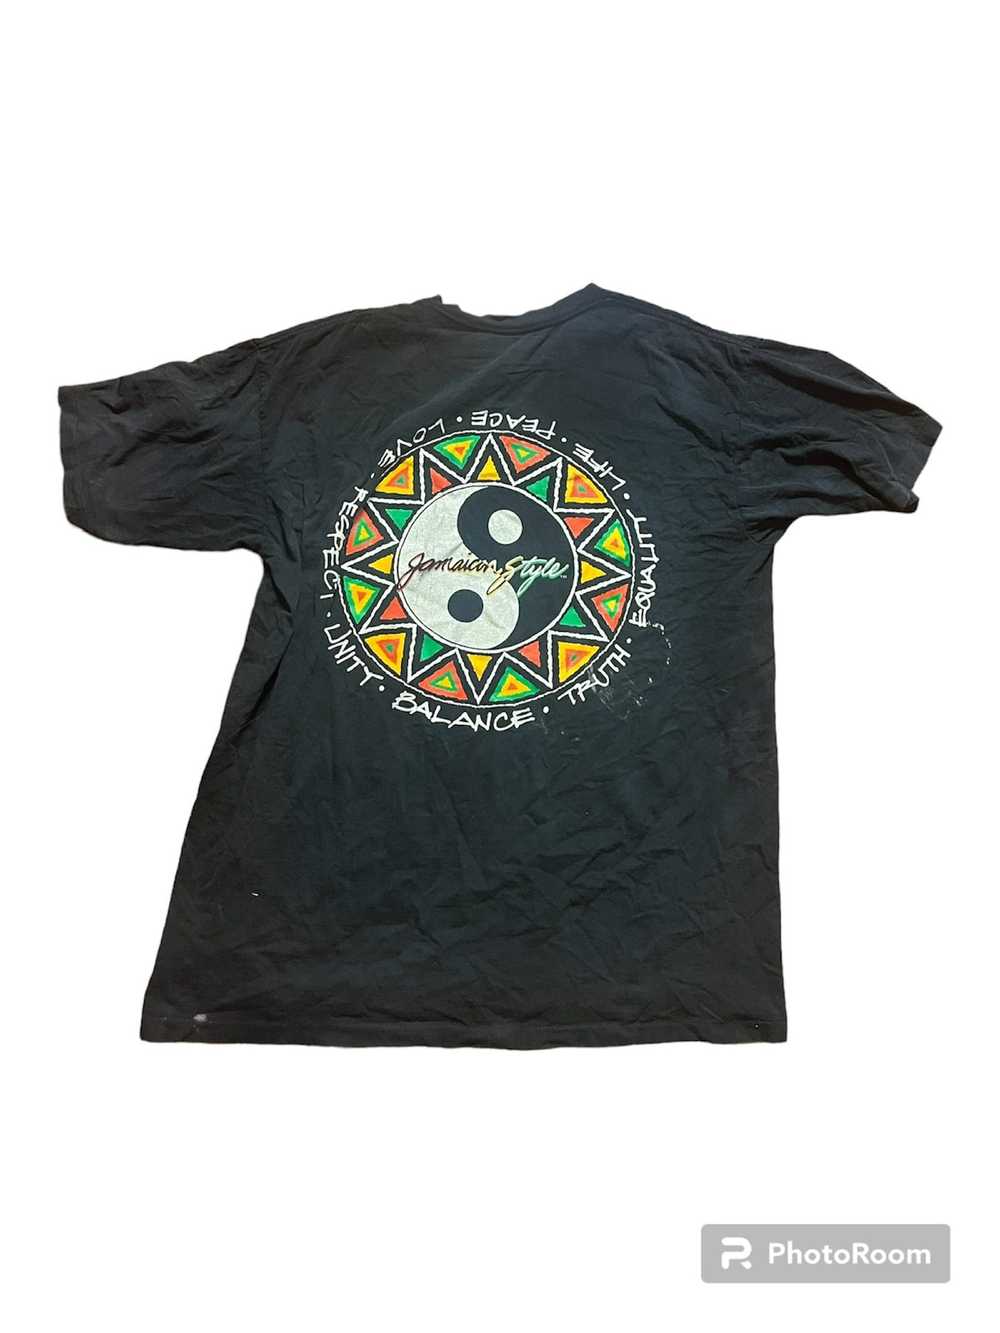 Vintage 1990s Jamaican style t shirt. - image 2